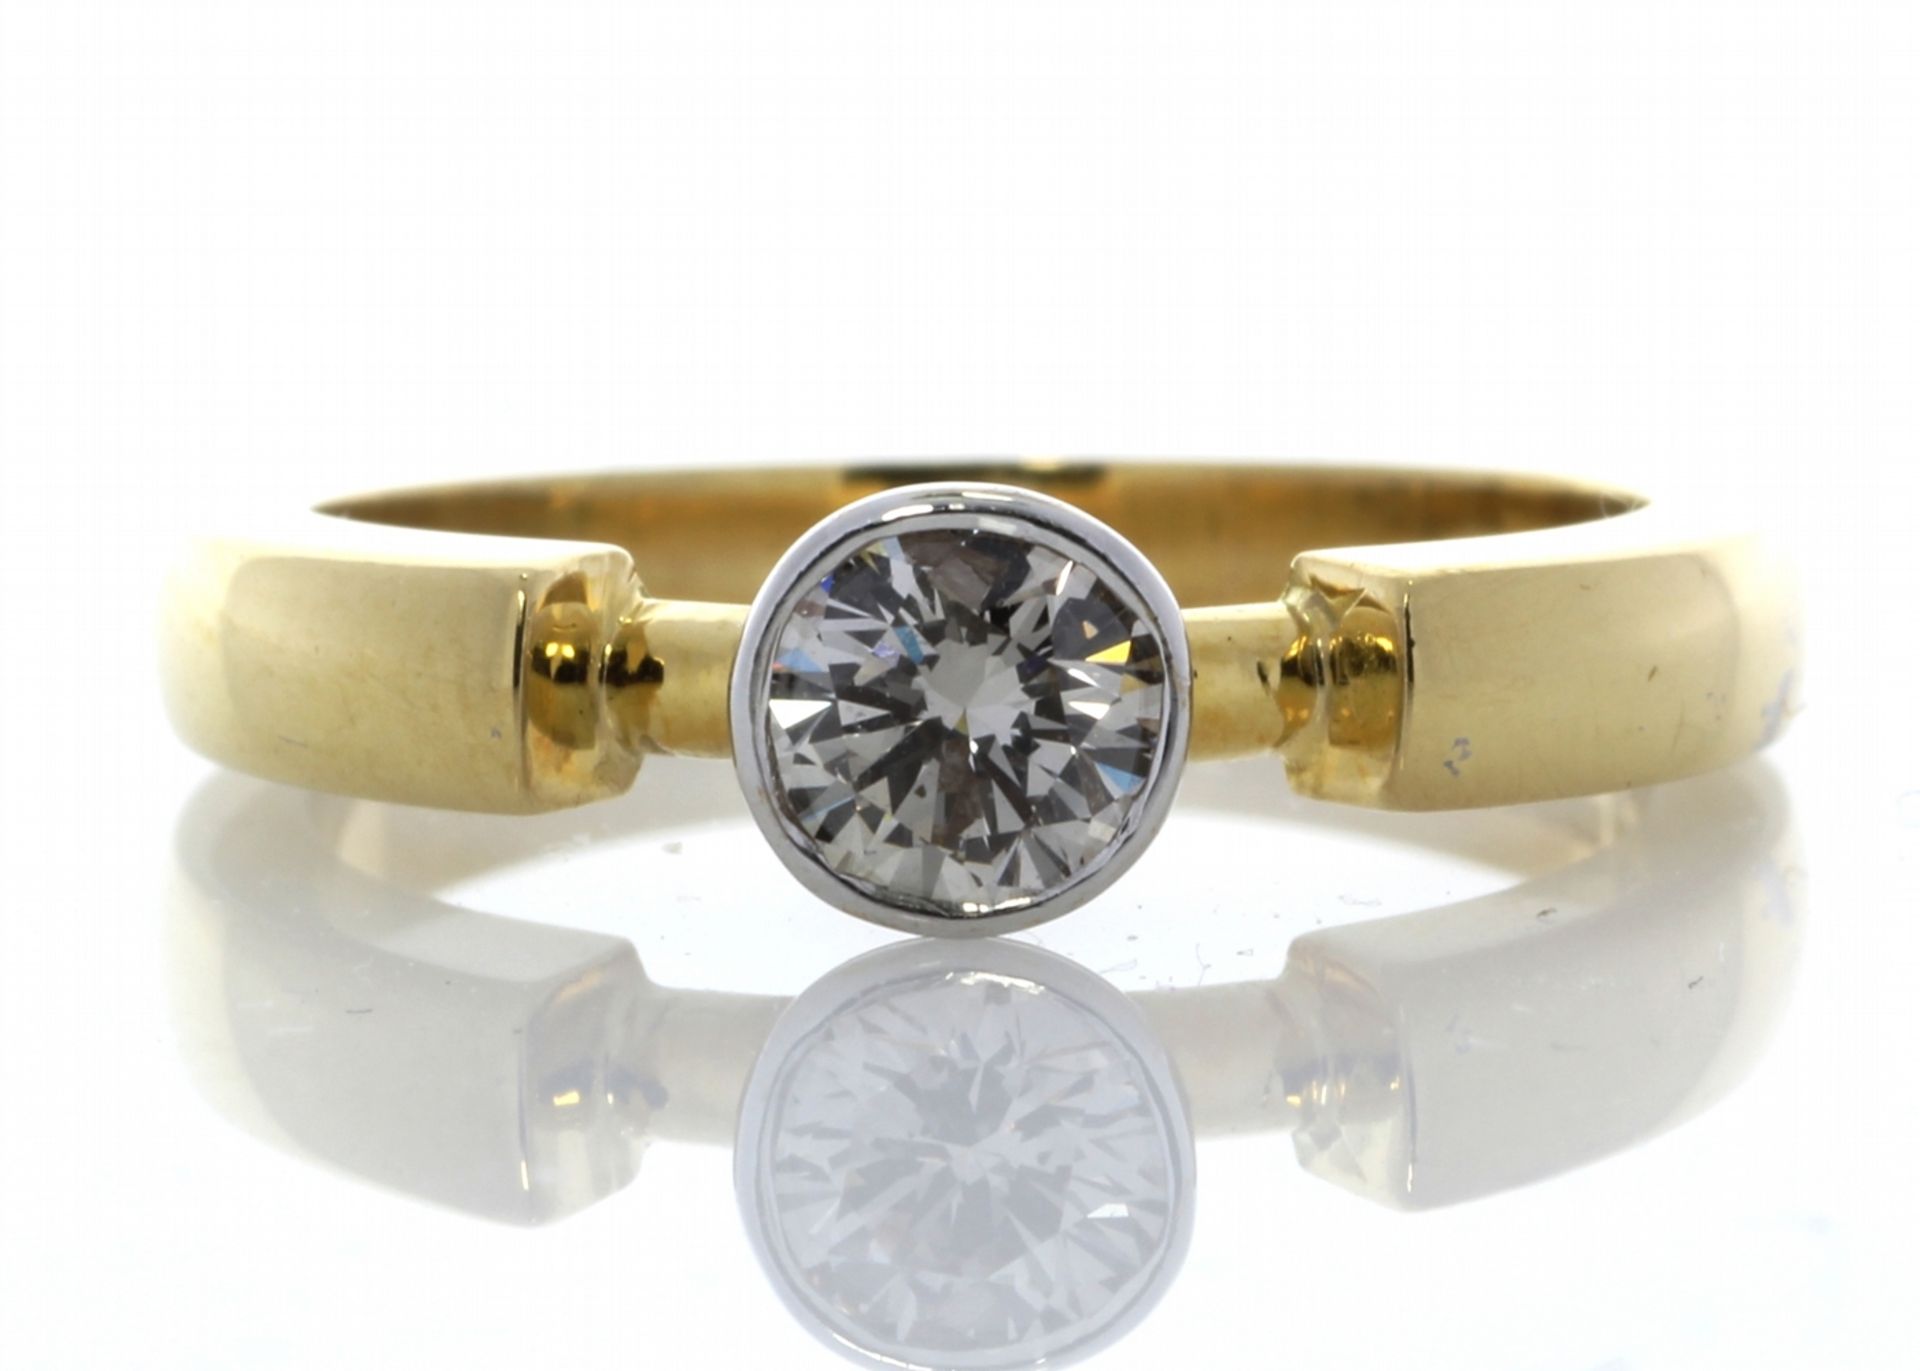 Valued by GIE £9,950.00 - 18ct Single Stone Fancy Rub Over Set Diamond Ring 0.53 Carats - 1107053,